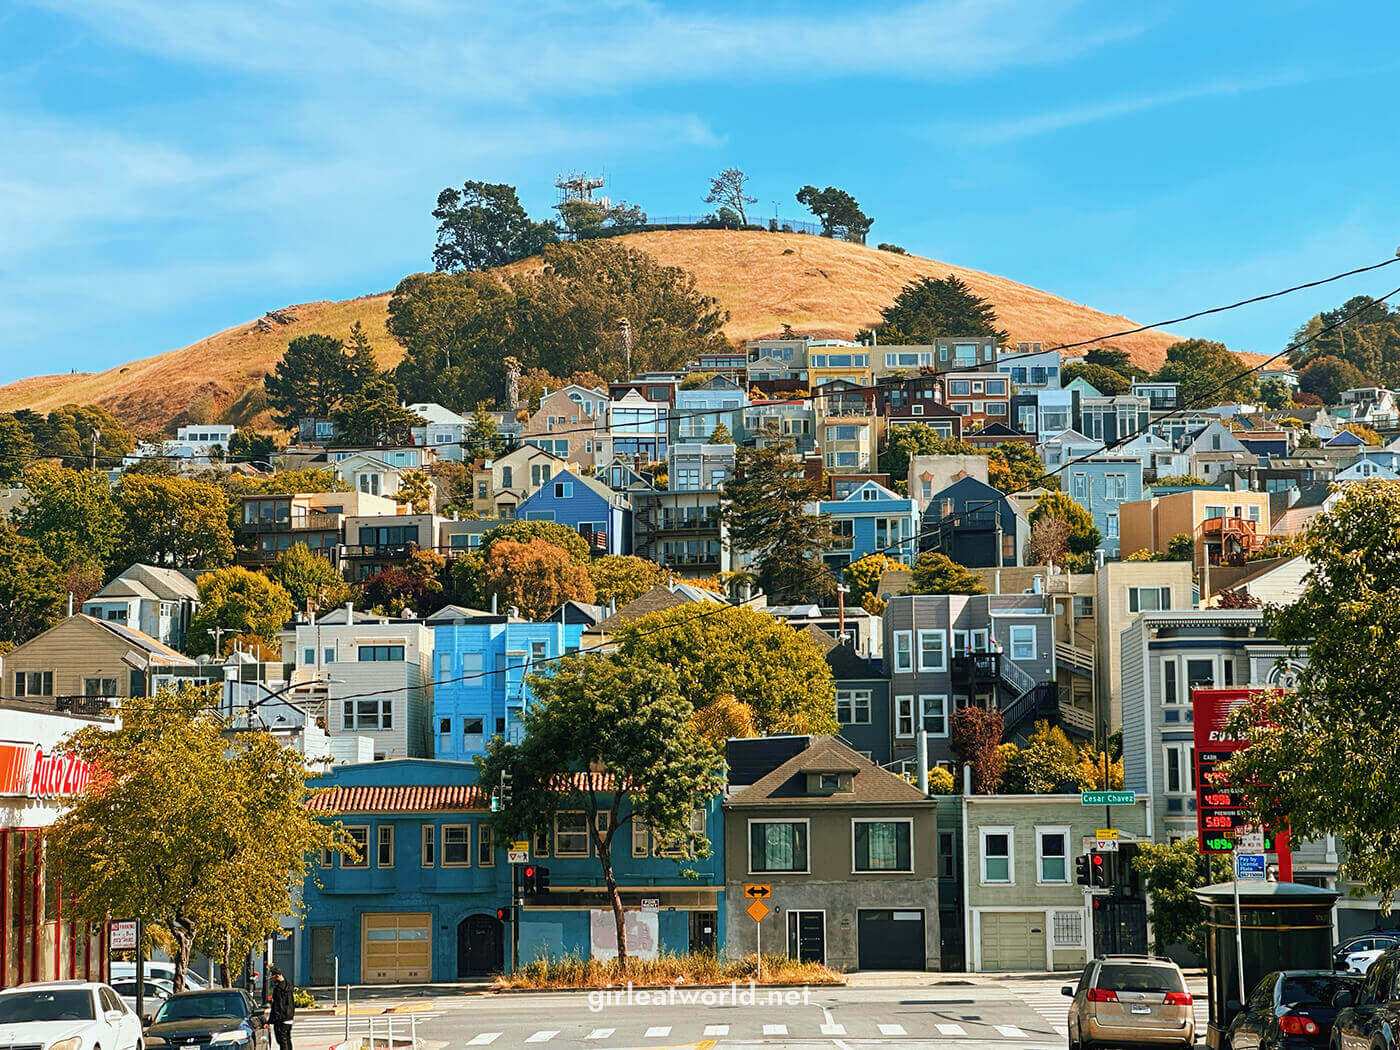 San Francisco Itinerary - Bernal Heights from Mission district